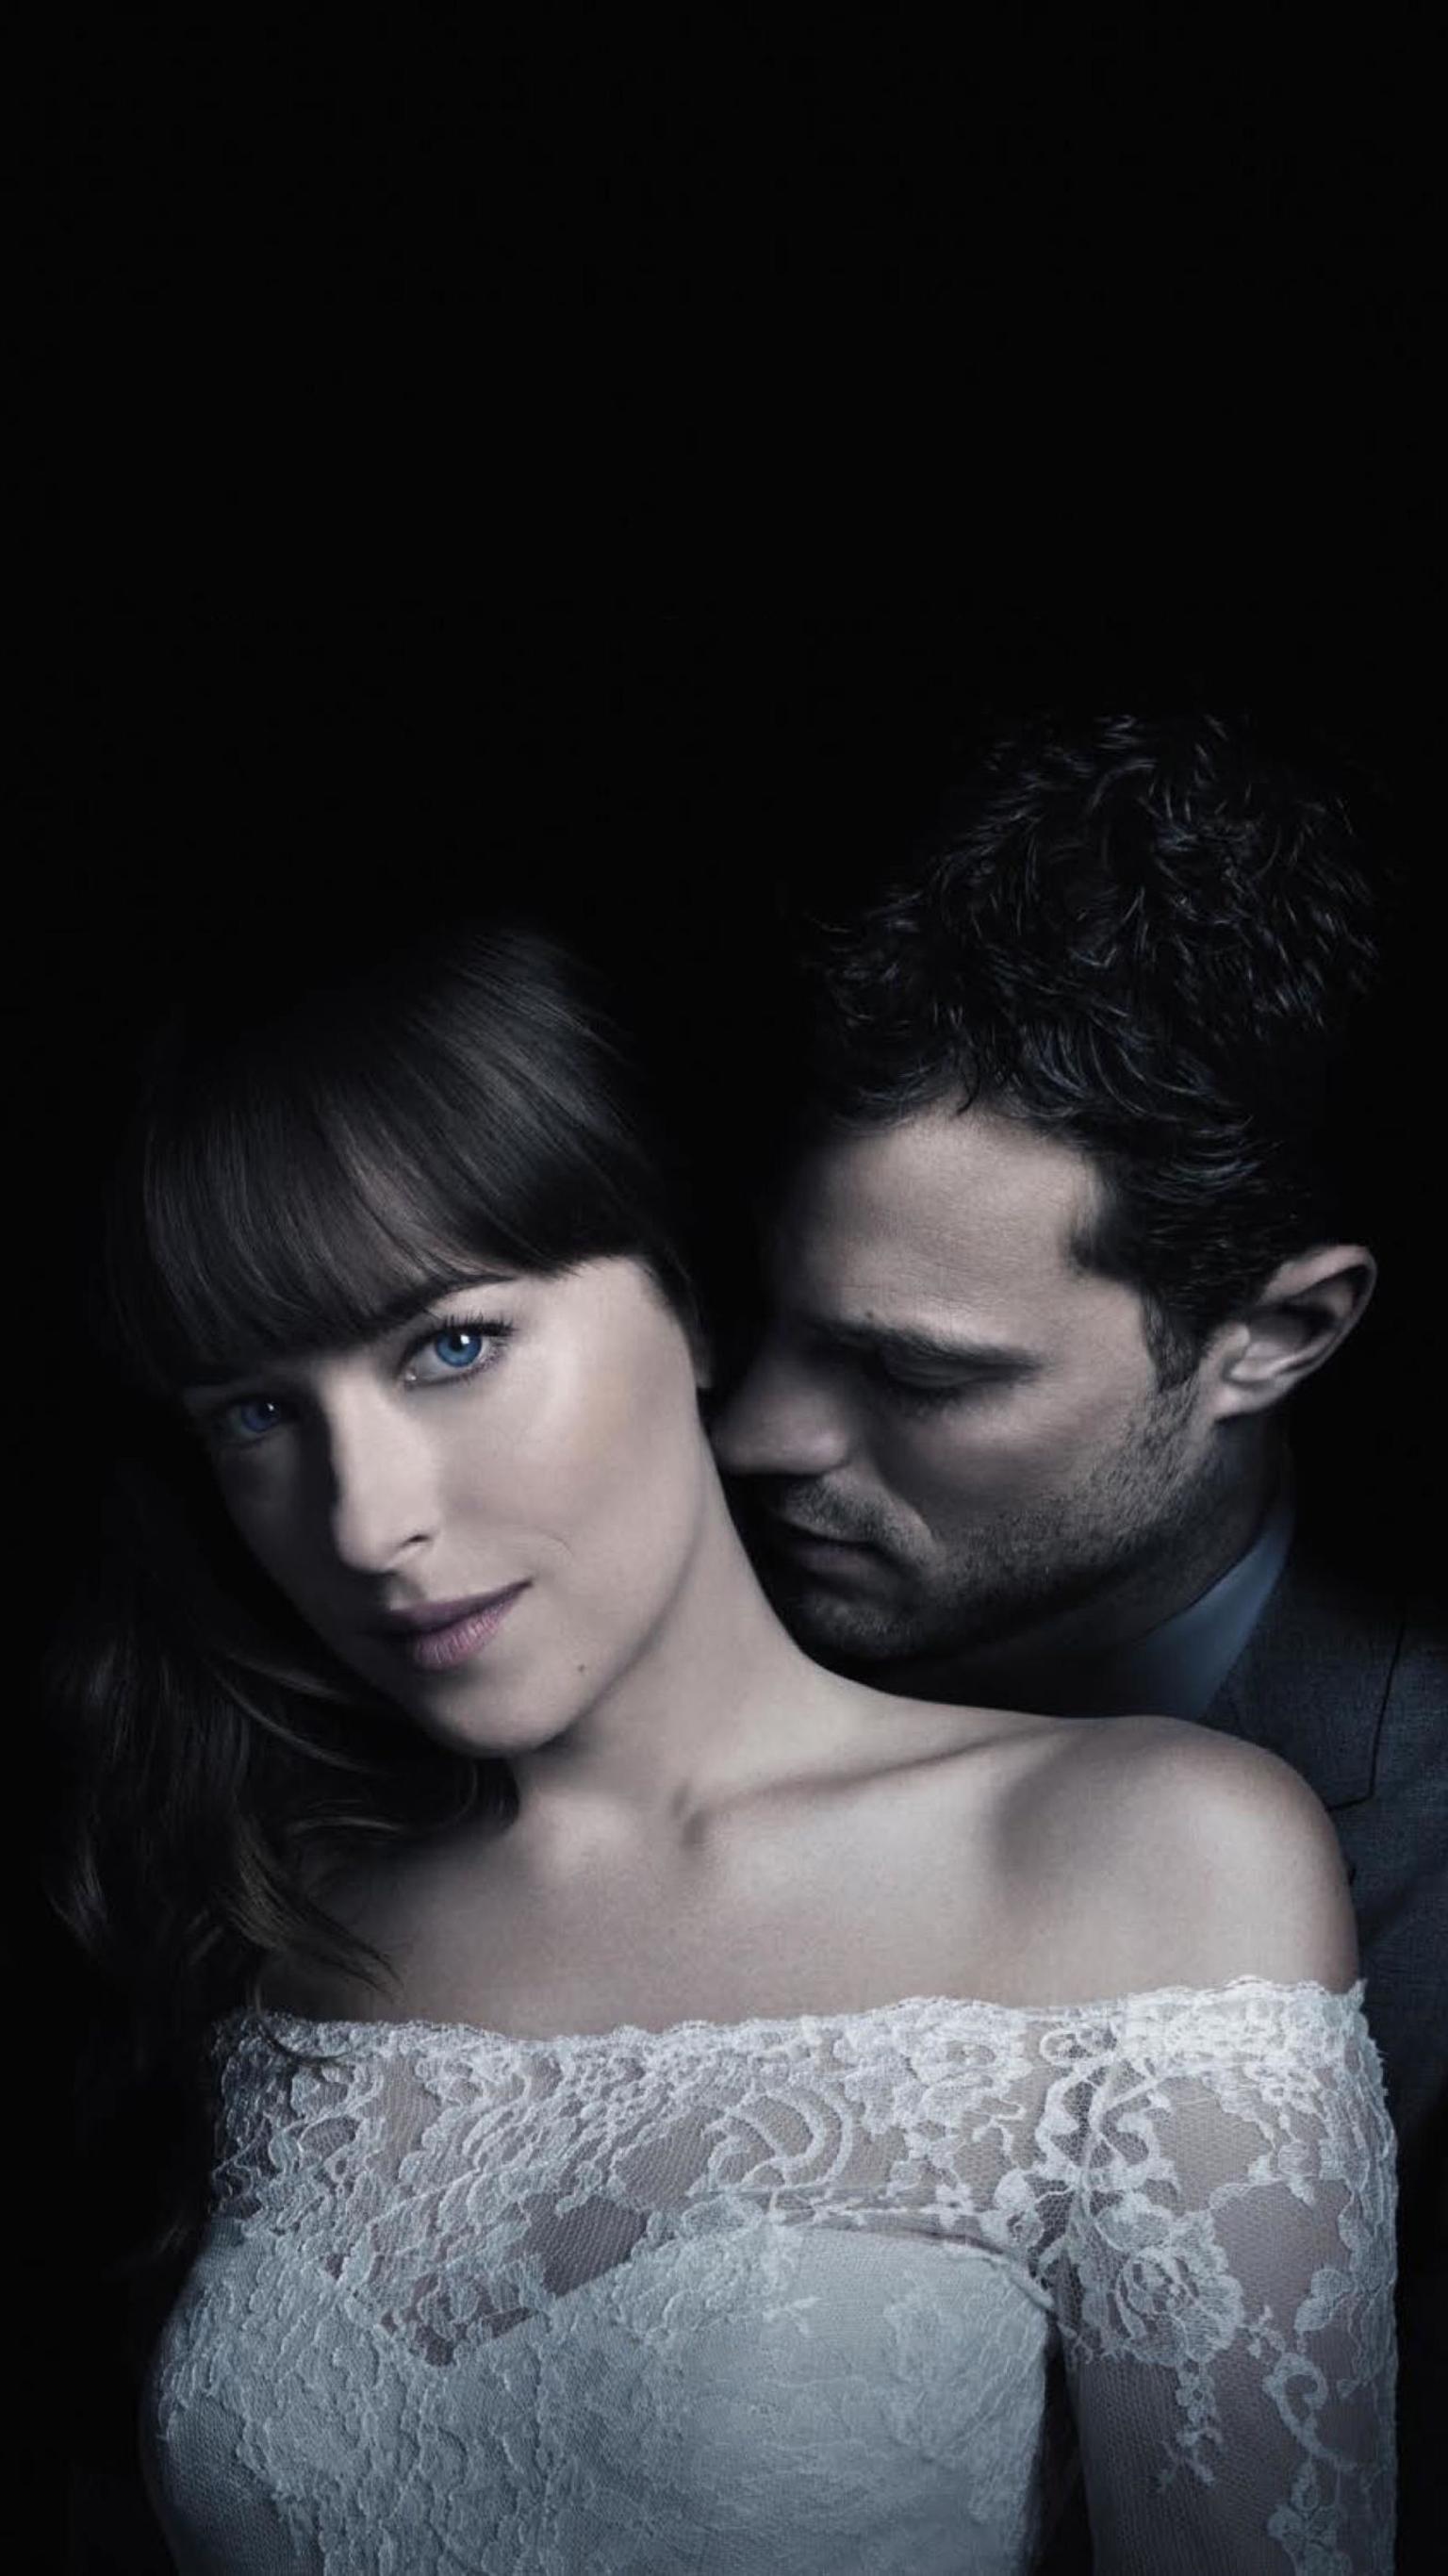 Fifty Shades Of Grey Iphone Wallpapers Wallpaper Cave